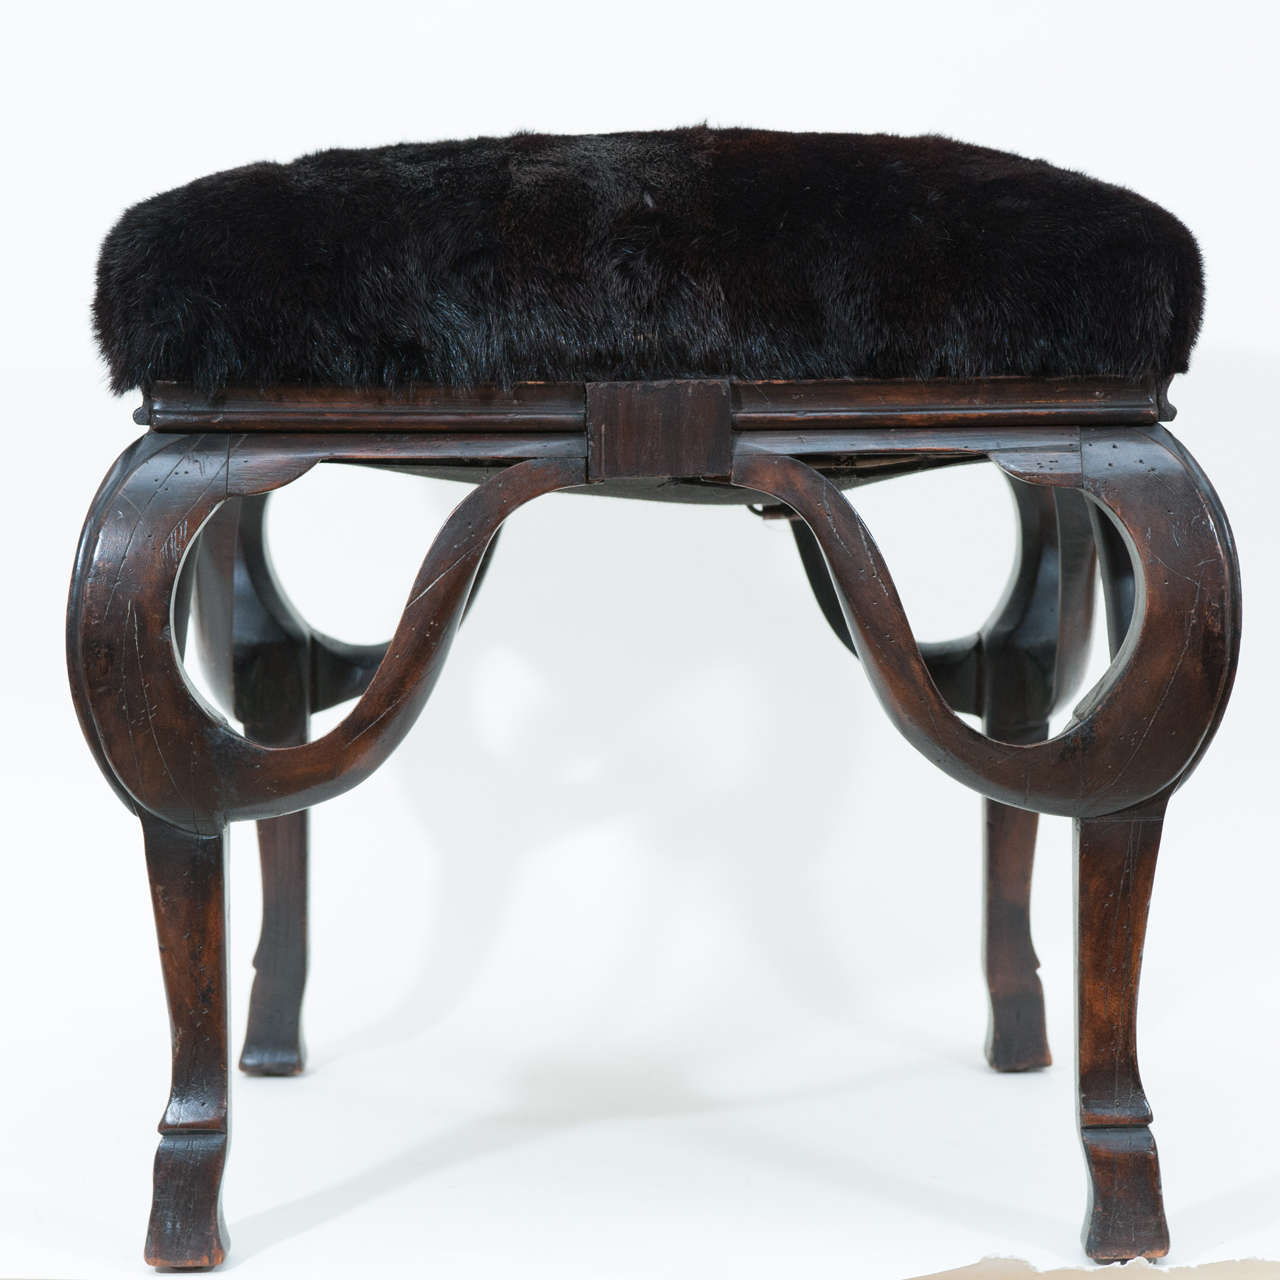 In the many years I have bought and sold antiques and vintage items I have never seen
such a unique and sculptural
wood bench as this! I suspect it is Italian and it's lines suggest an Art Nouveau
influence coupled with a hoof foot, yet it has a